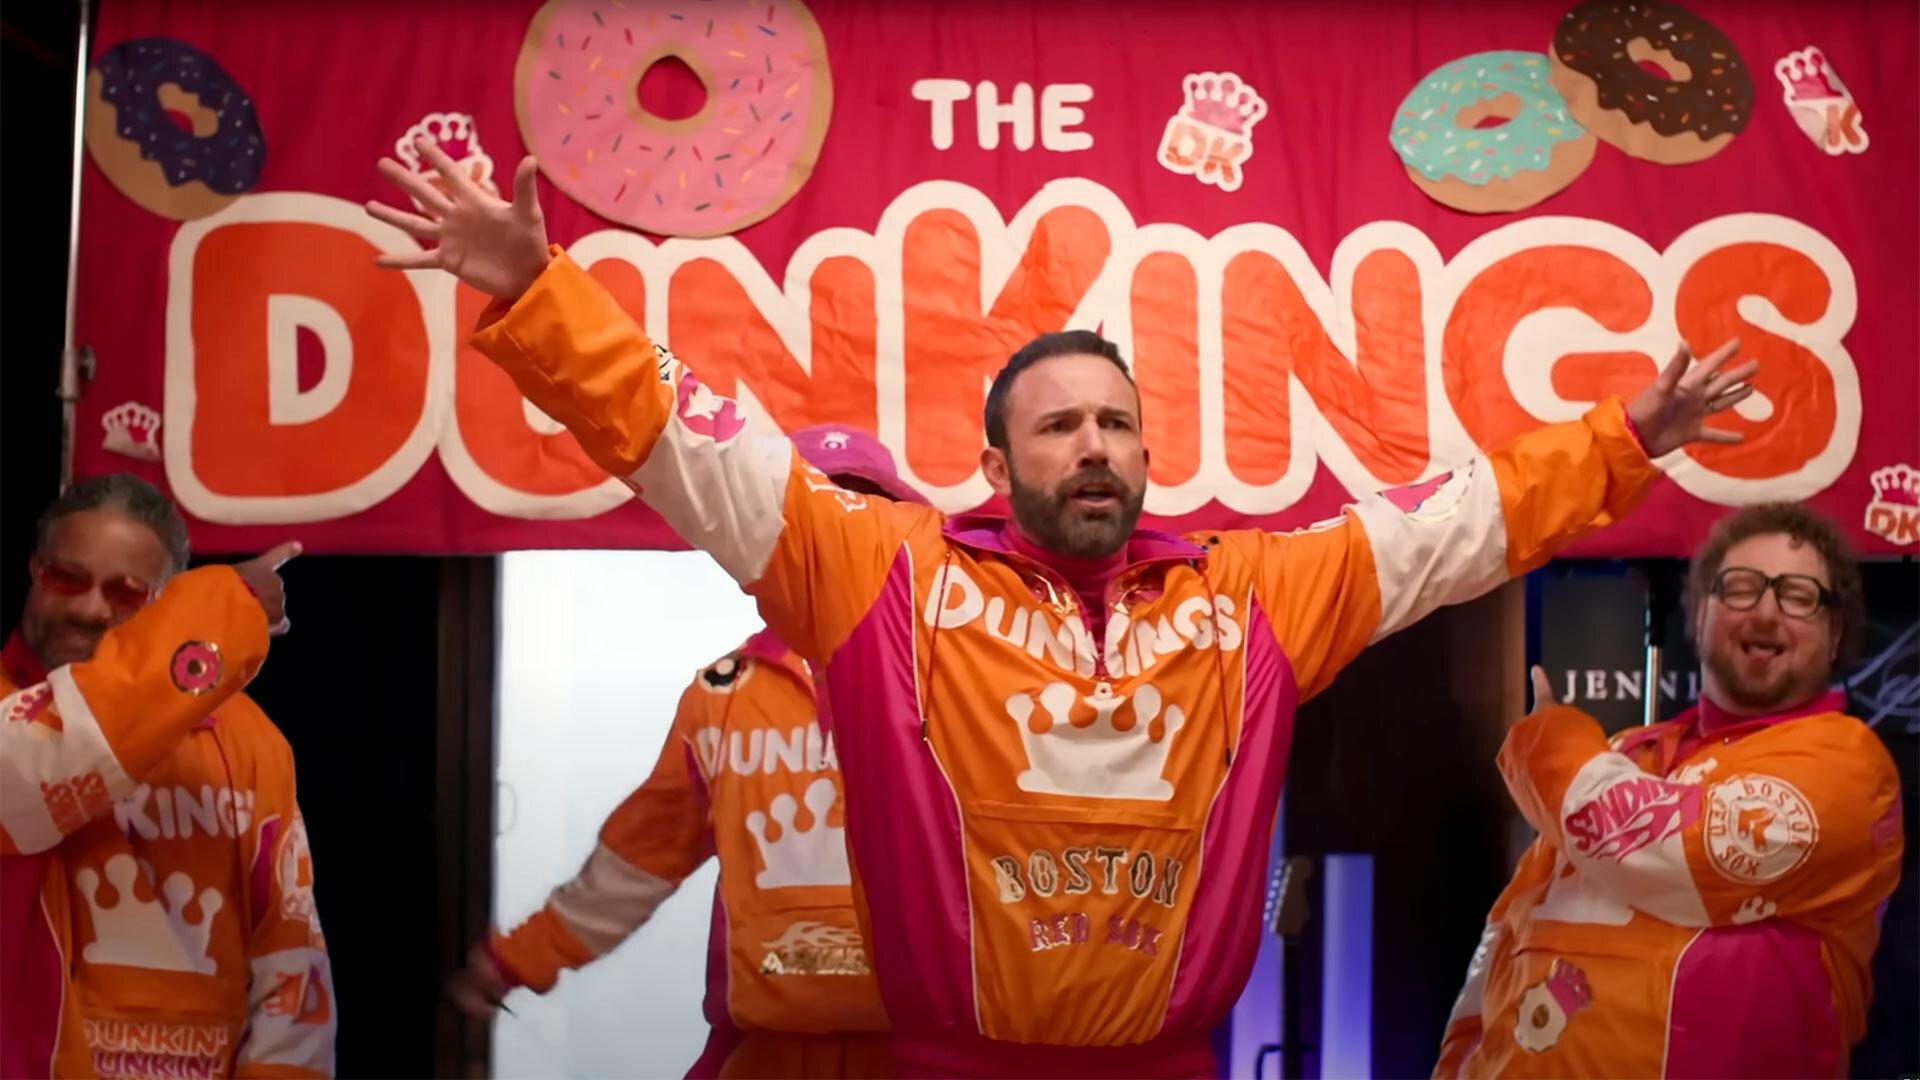 Ben Affleck with arms wide open in front of a DunKings sign